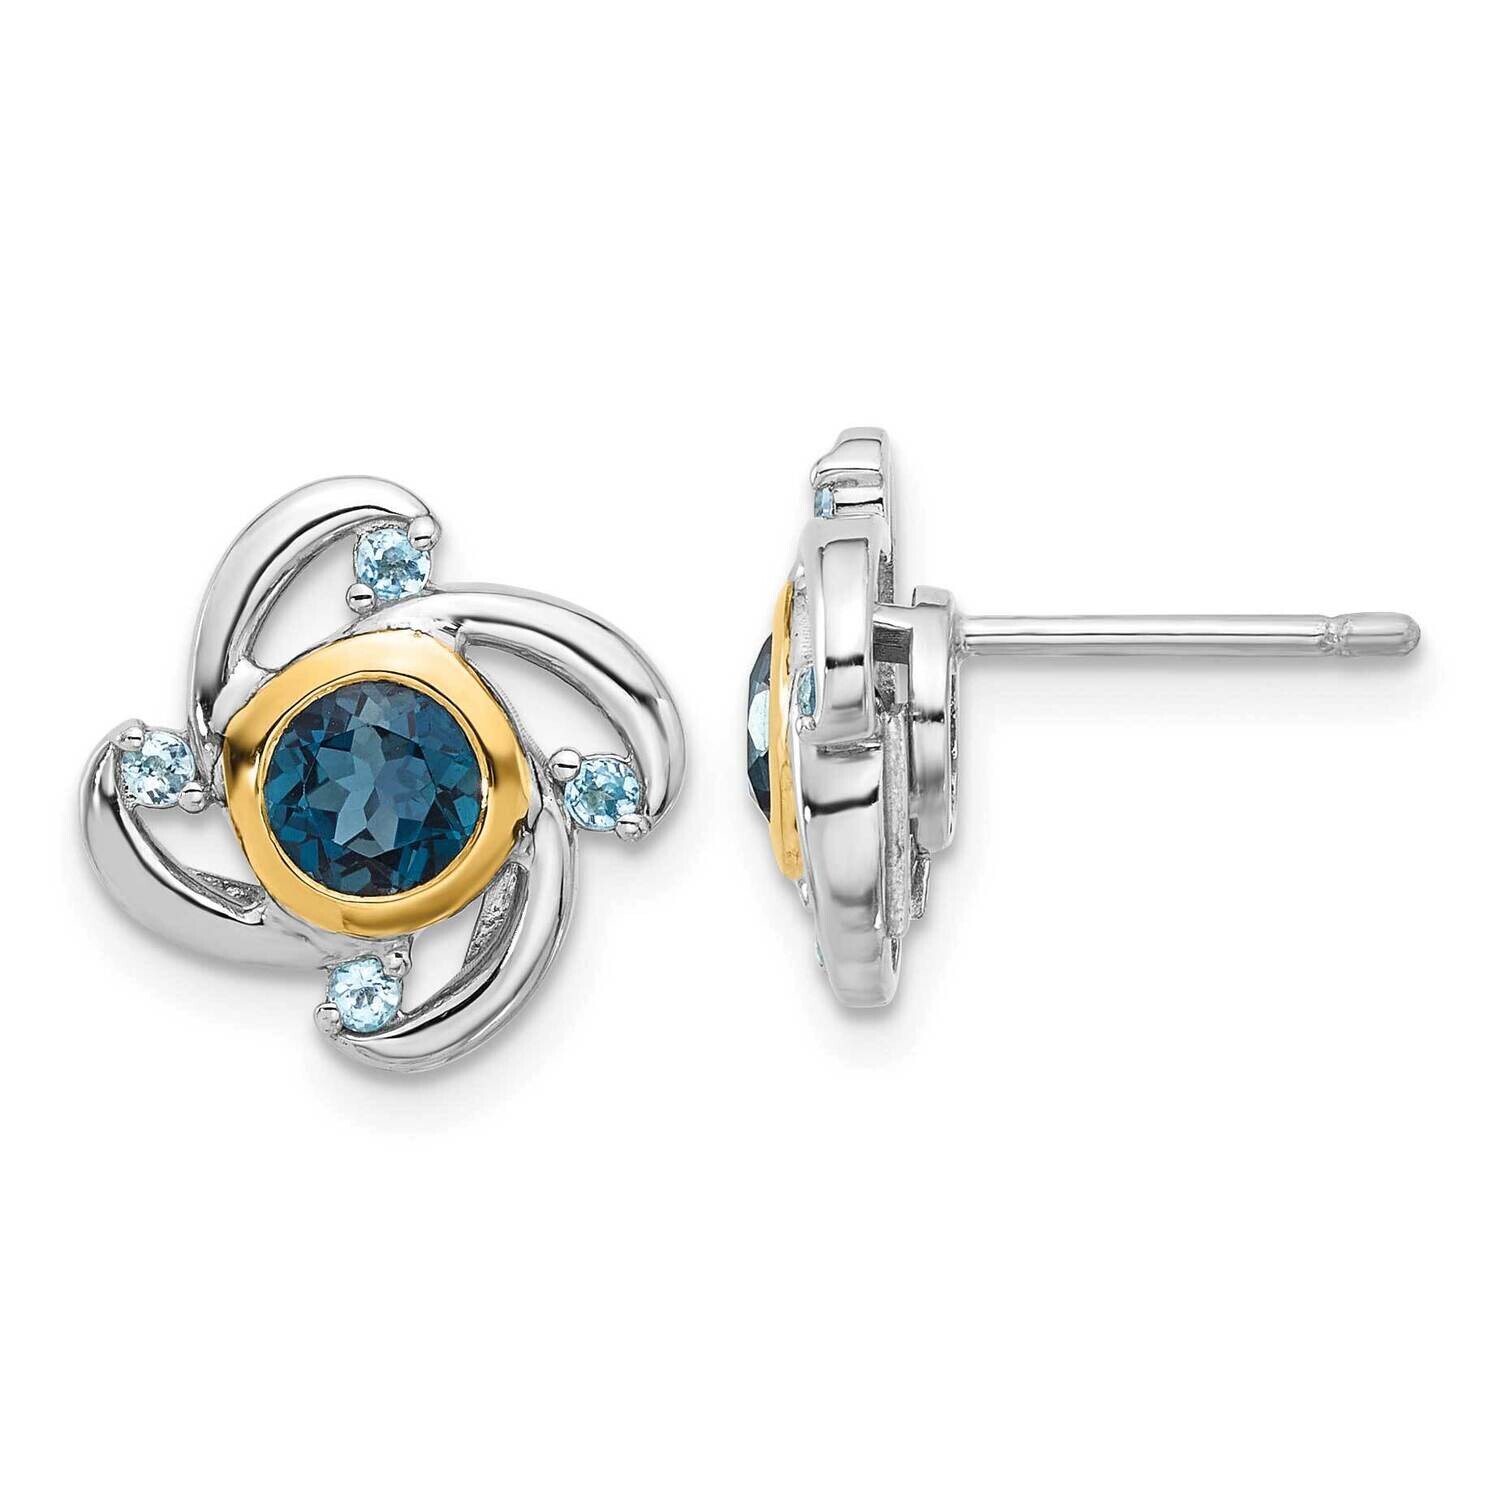 Shey Couture 14K Accent 1.27 London Blue Topaz .16 Swiss Blue Topaz Earrings Sterling Silver Rhodium-Plated QTC1795